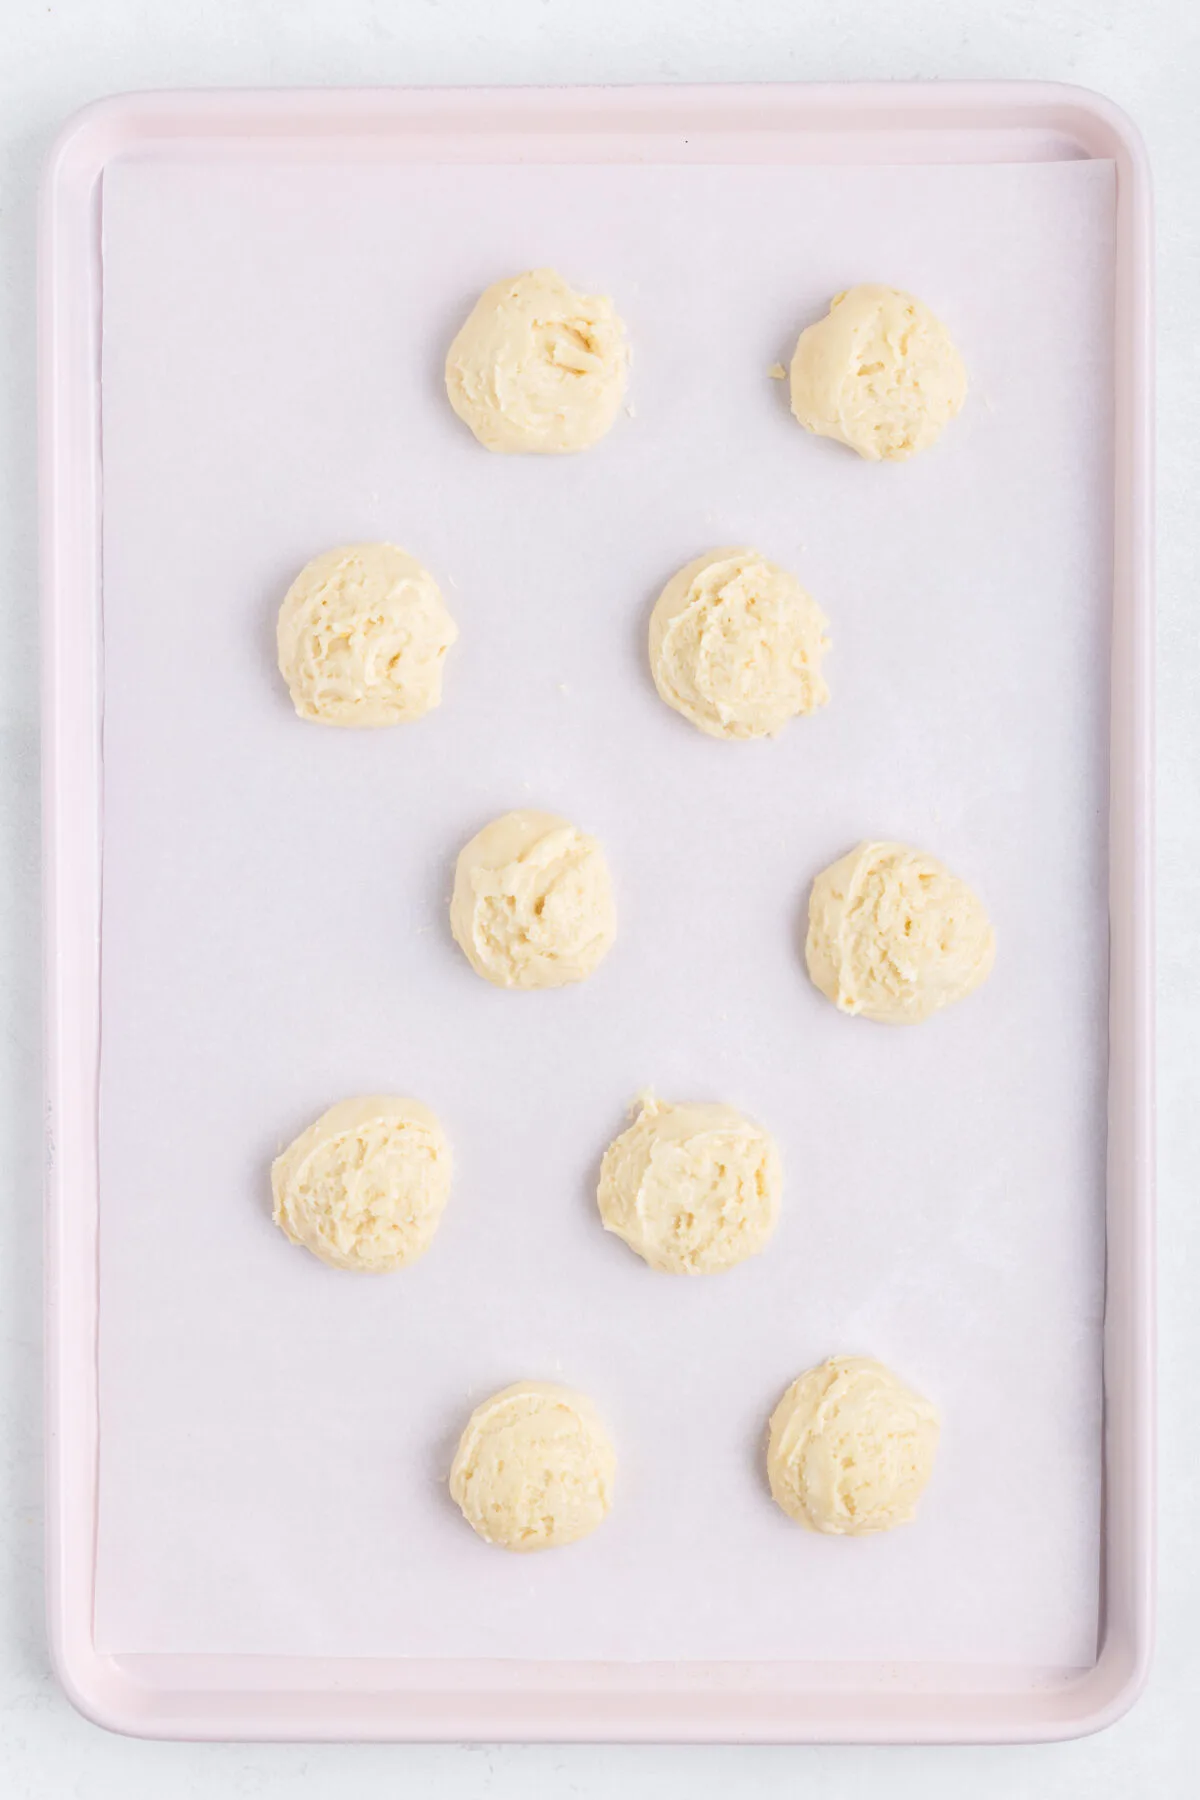 Dough balls on a baking sheet lined with parchment paper.